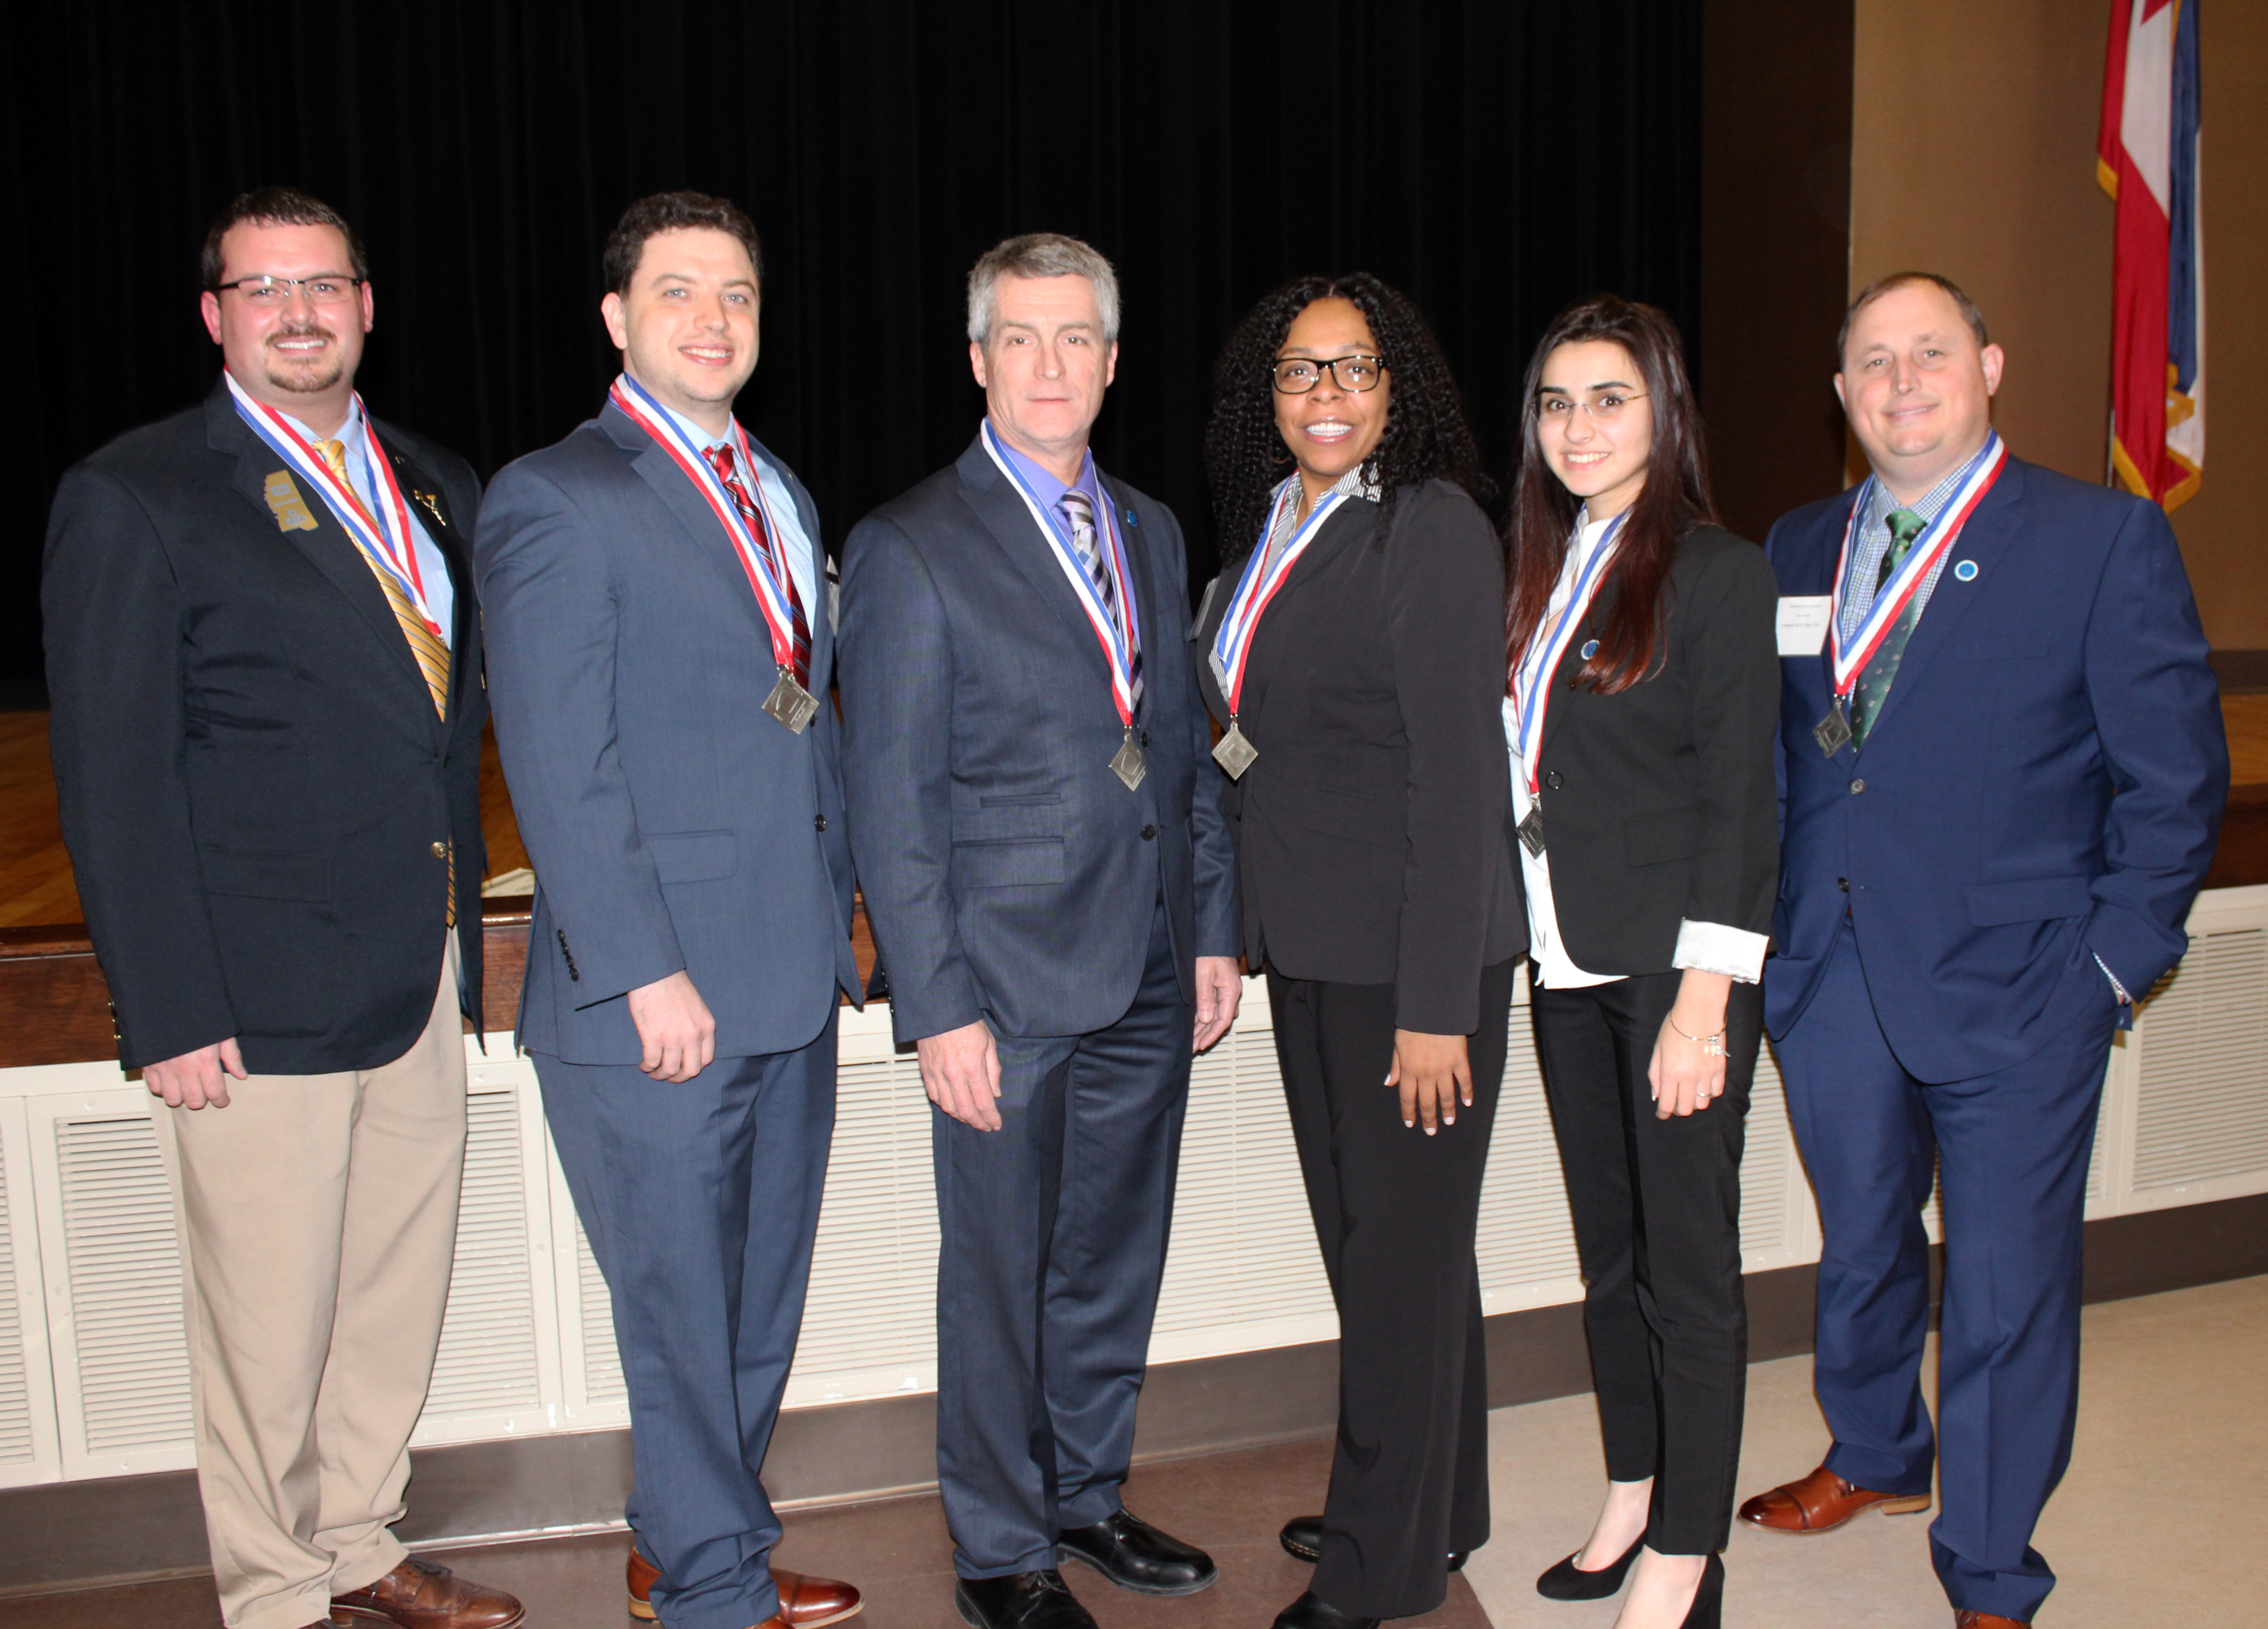 Virginia-bound MSU-Meridian DECA students (l-r) Steven Miller, Daniel Johnson, Anthony McOlgan, Crystal Windham, Mariam Khmaladze and Steven Pamplin. (Photo submitted) 